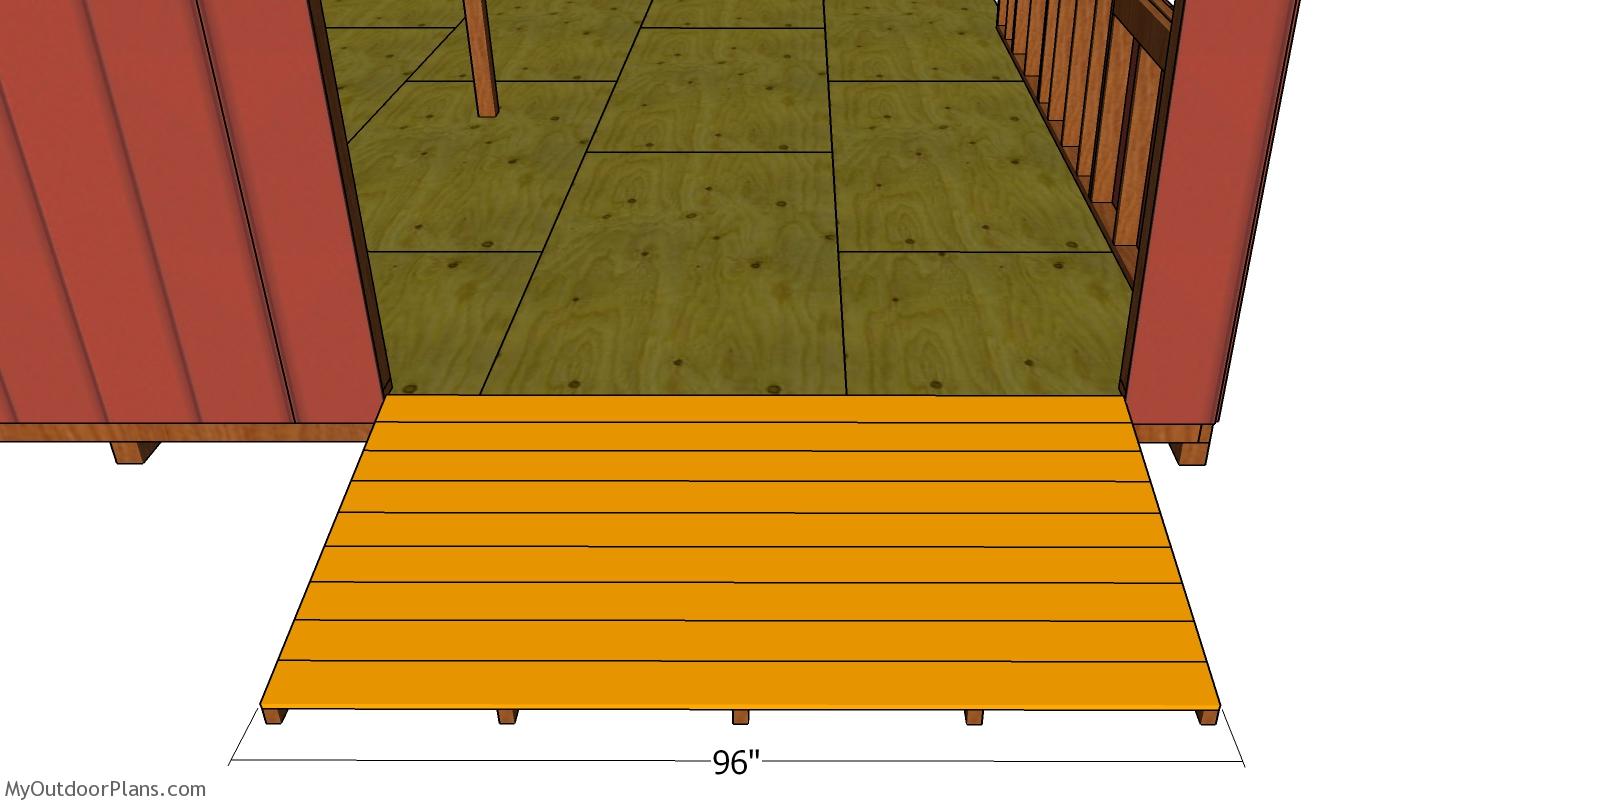 Ramp Plans for Double Pitched Roof Shed